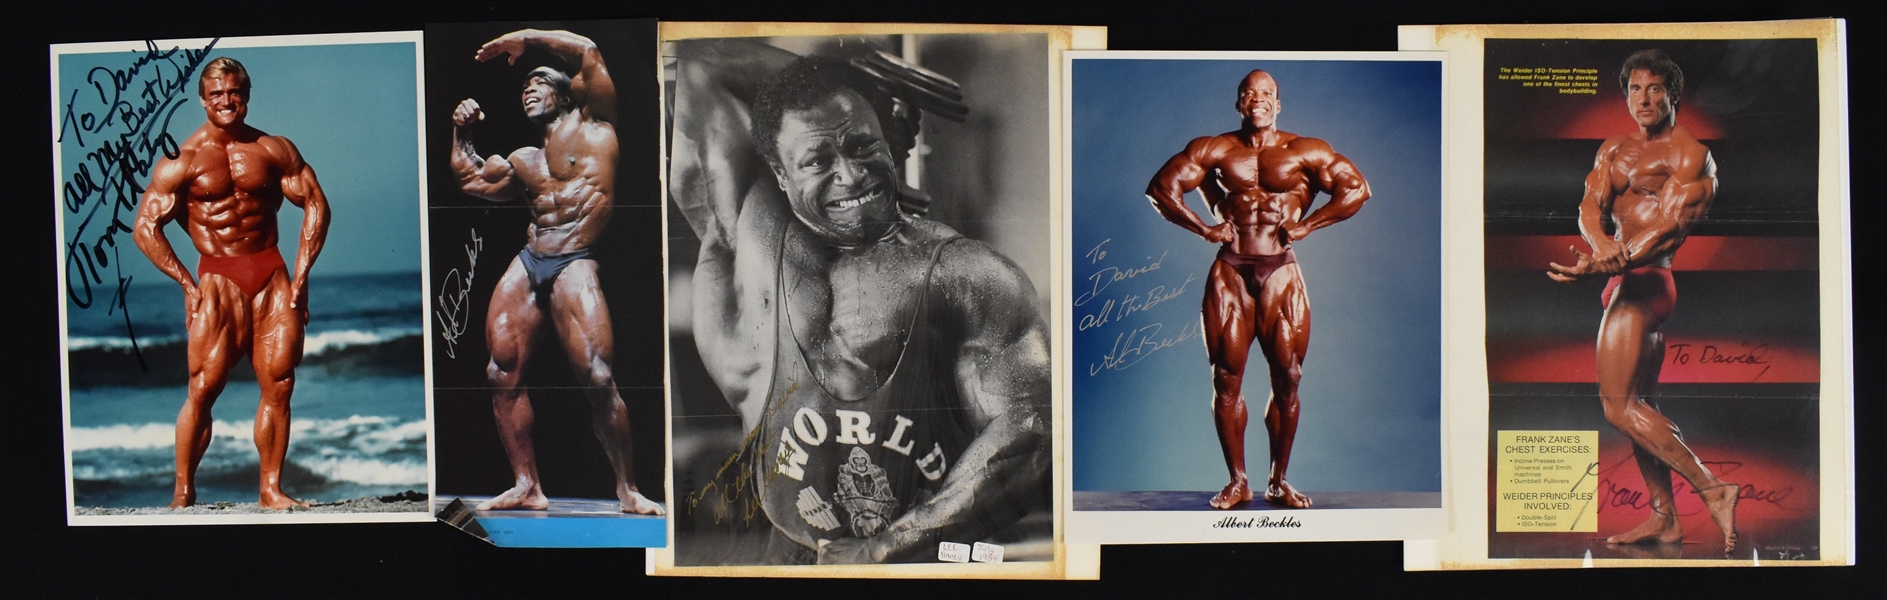 Lot of 5 Autographed Weightlifter Photos